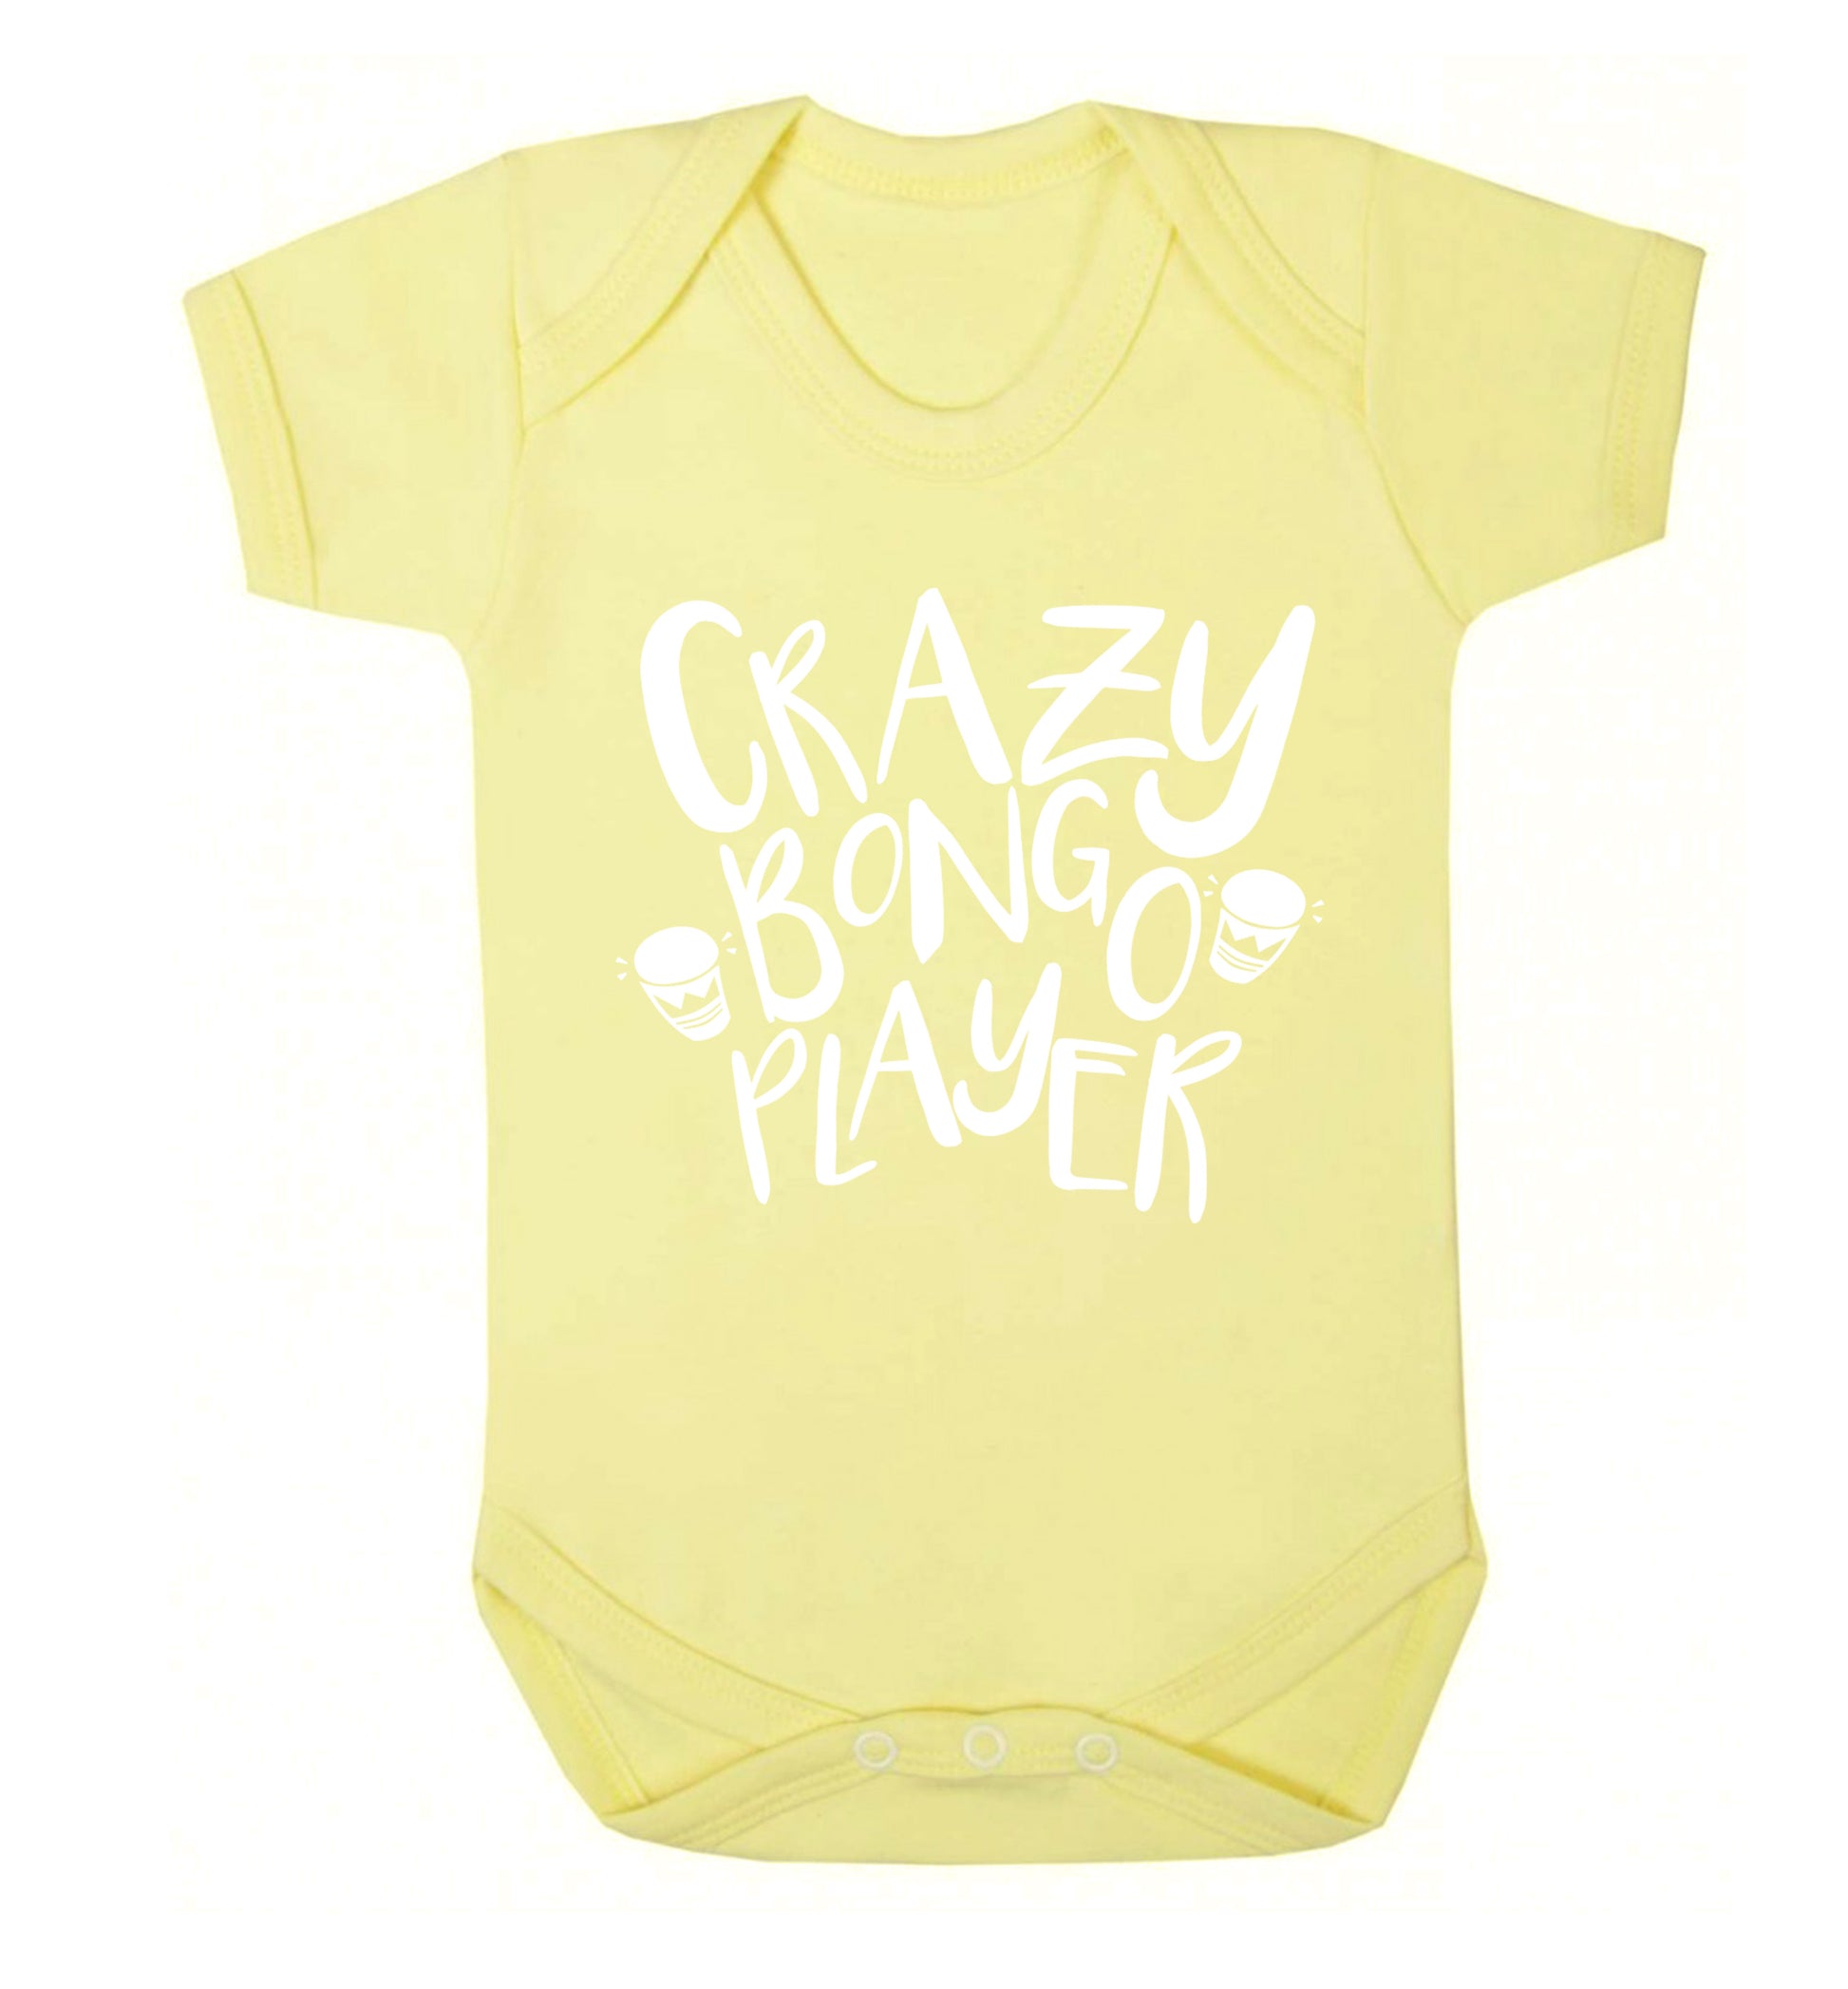 Crazy bongo player Baby Vest pale yellow 18-24 months